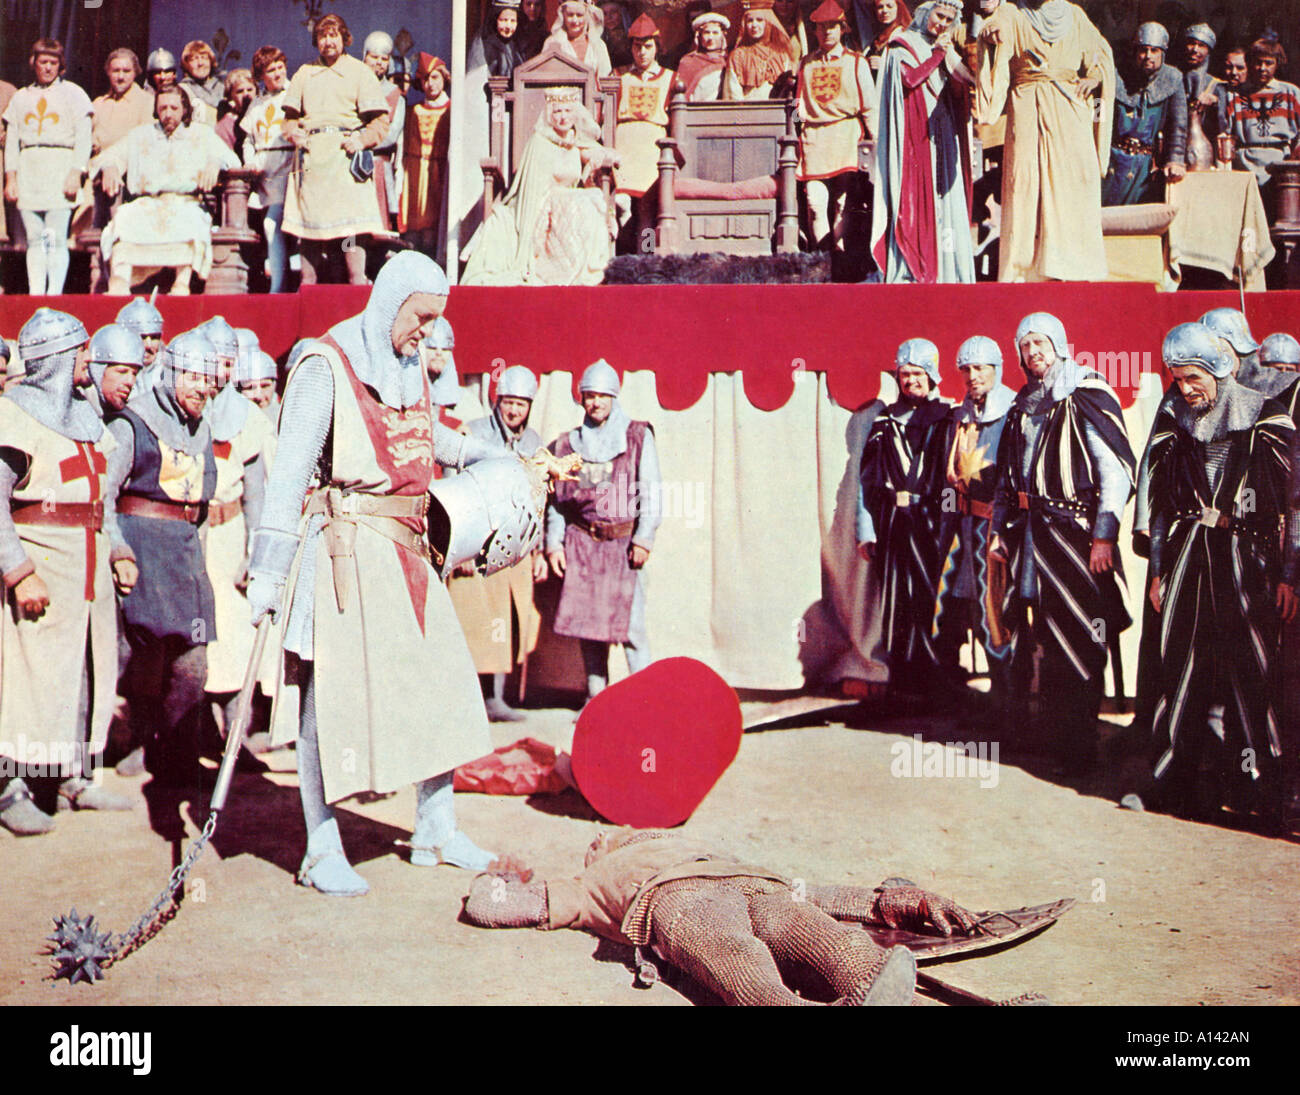 King Richard And The Crusaders Year 1954 Director David Butler George Sanders Based upon Walter Scott s book Stock Photo